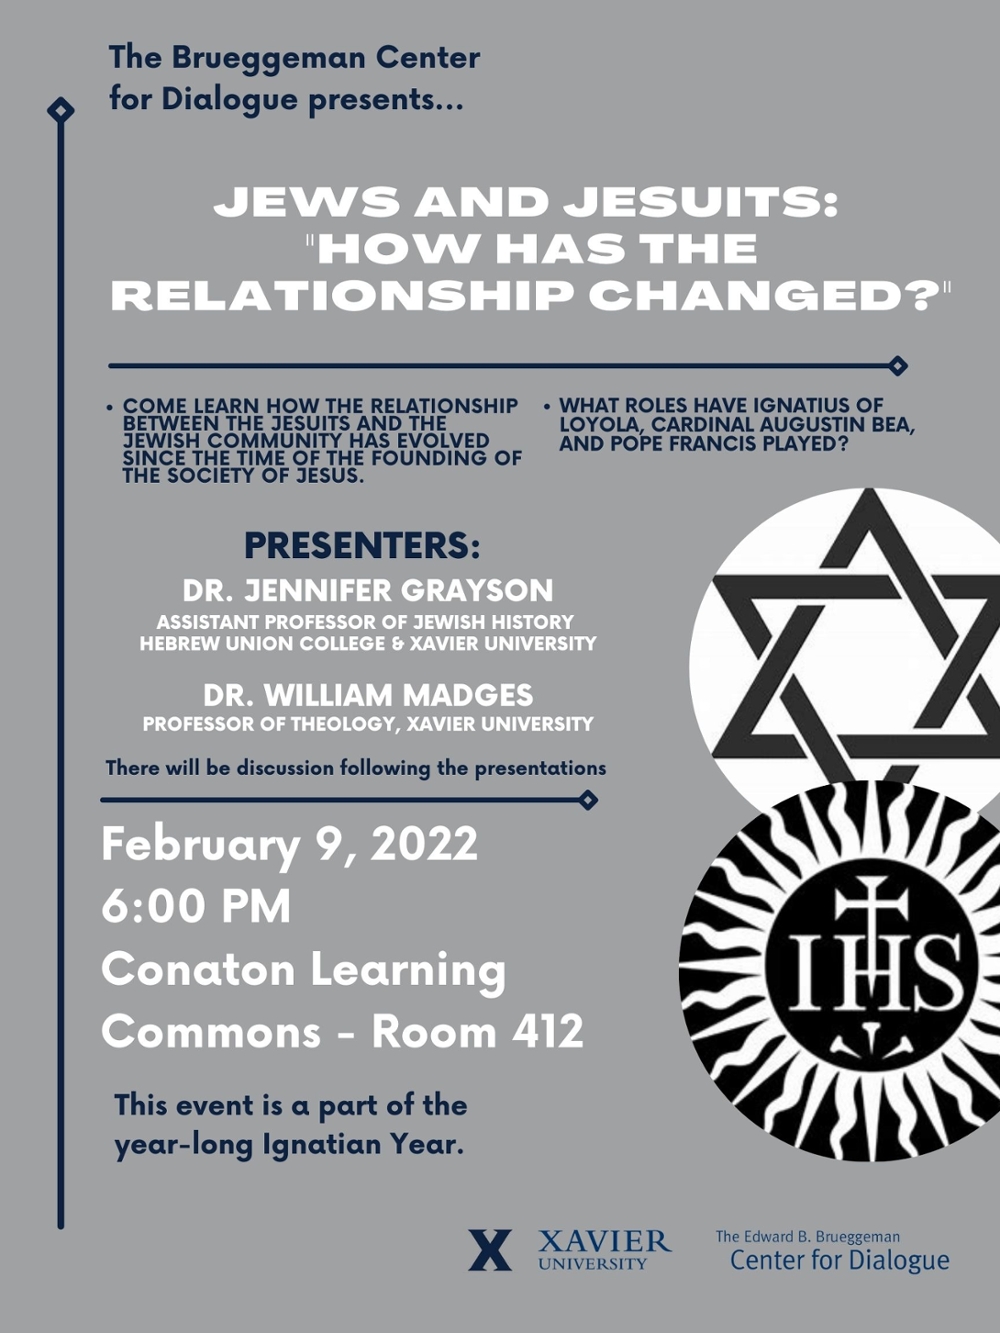 Jews and Jesuits Presentation "How Has the Relationship Changed